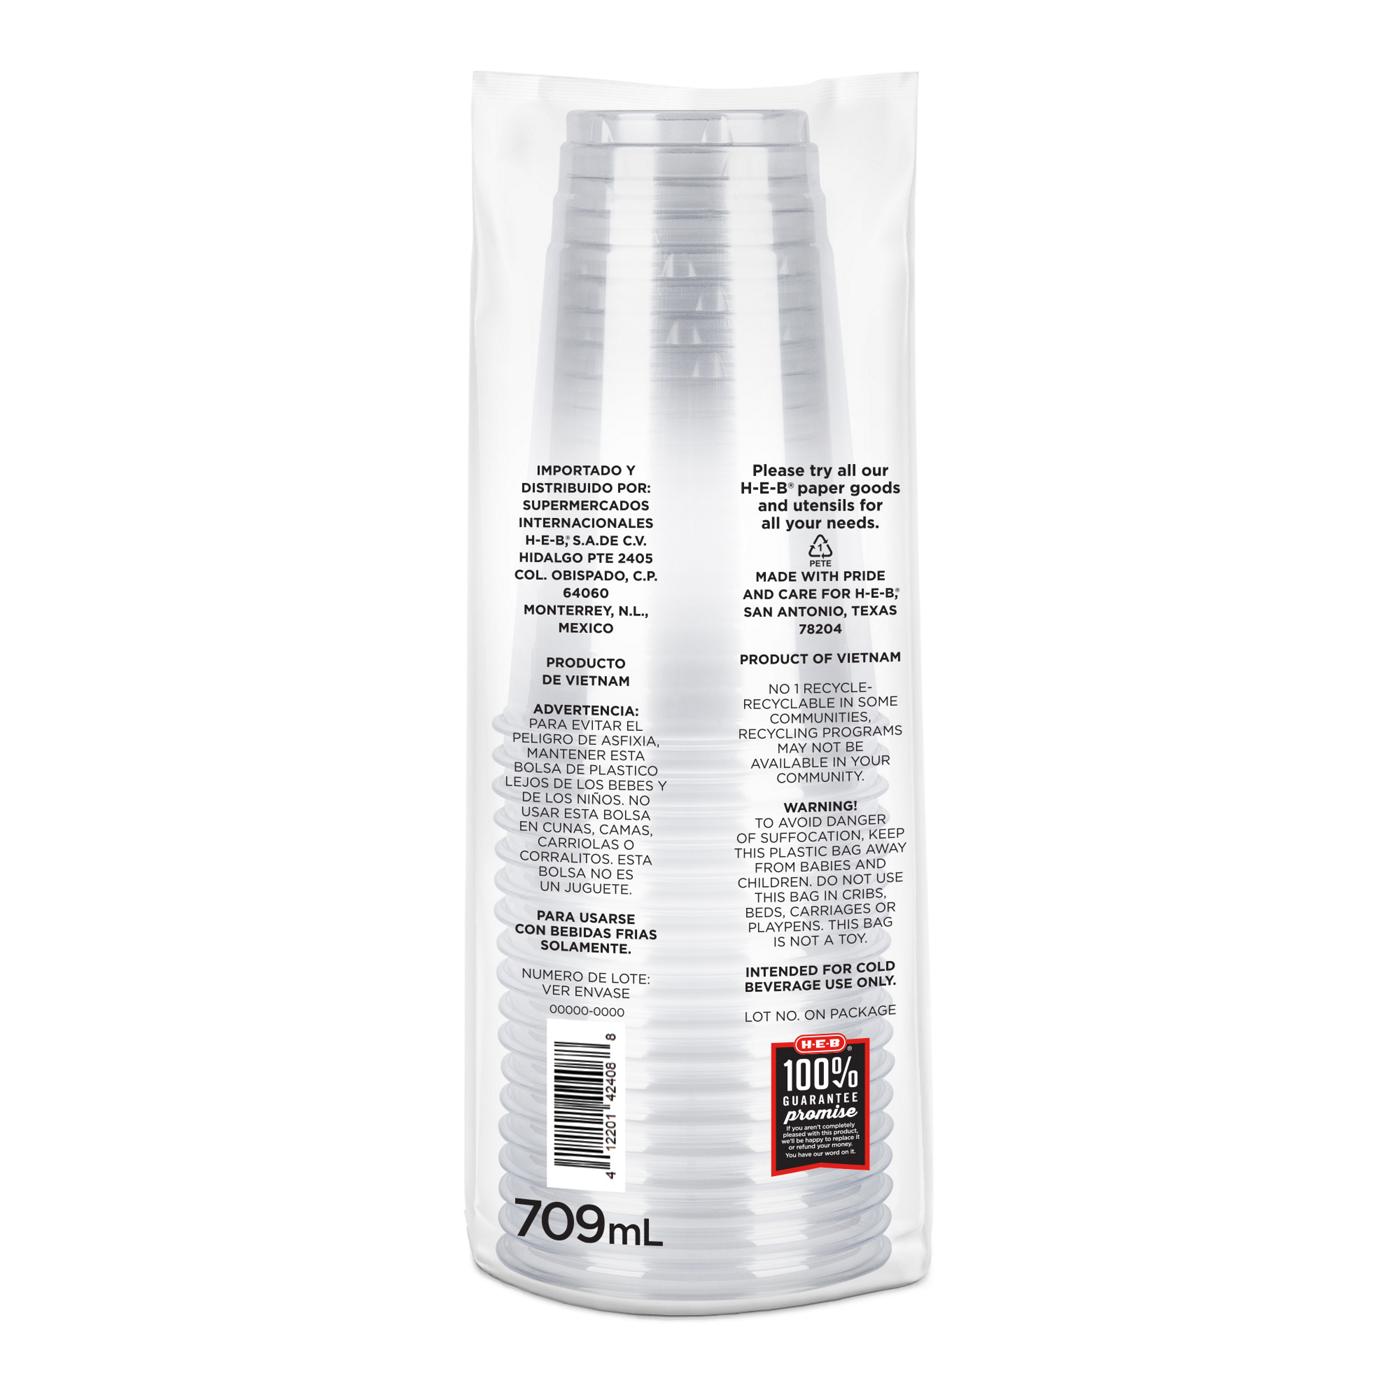 H-E-B 5.5 oz Clear Plastic To Go Cups with Lids - Shop Drinkware at H-E-B